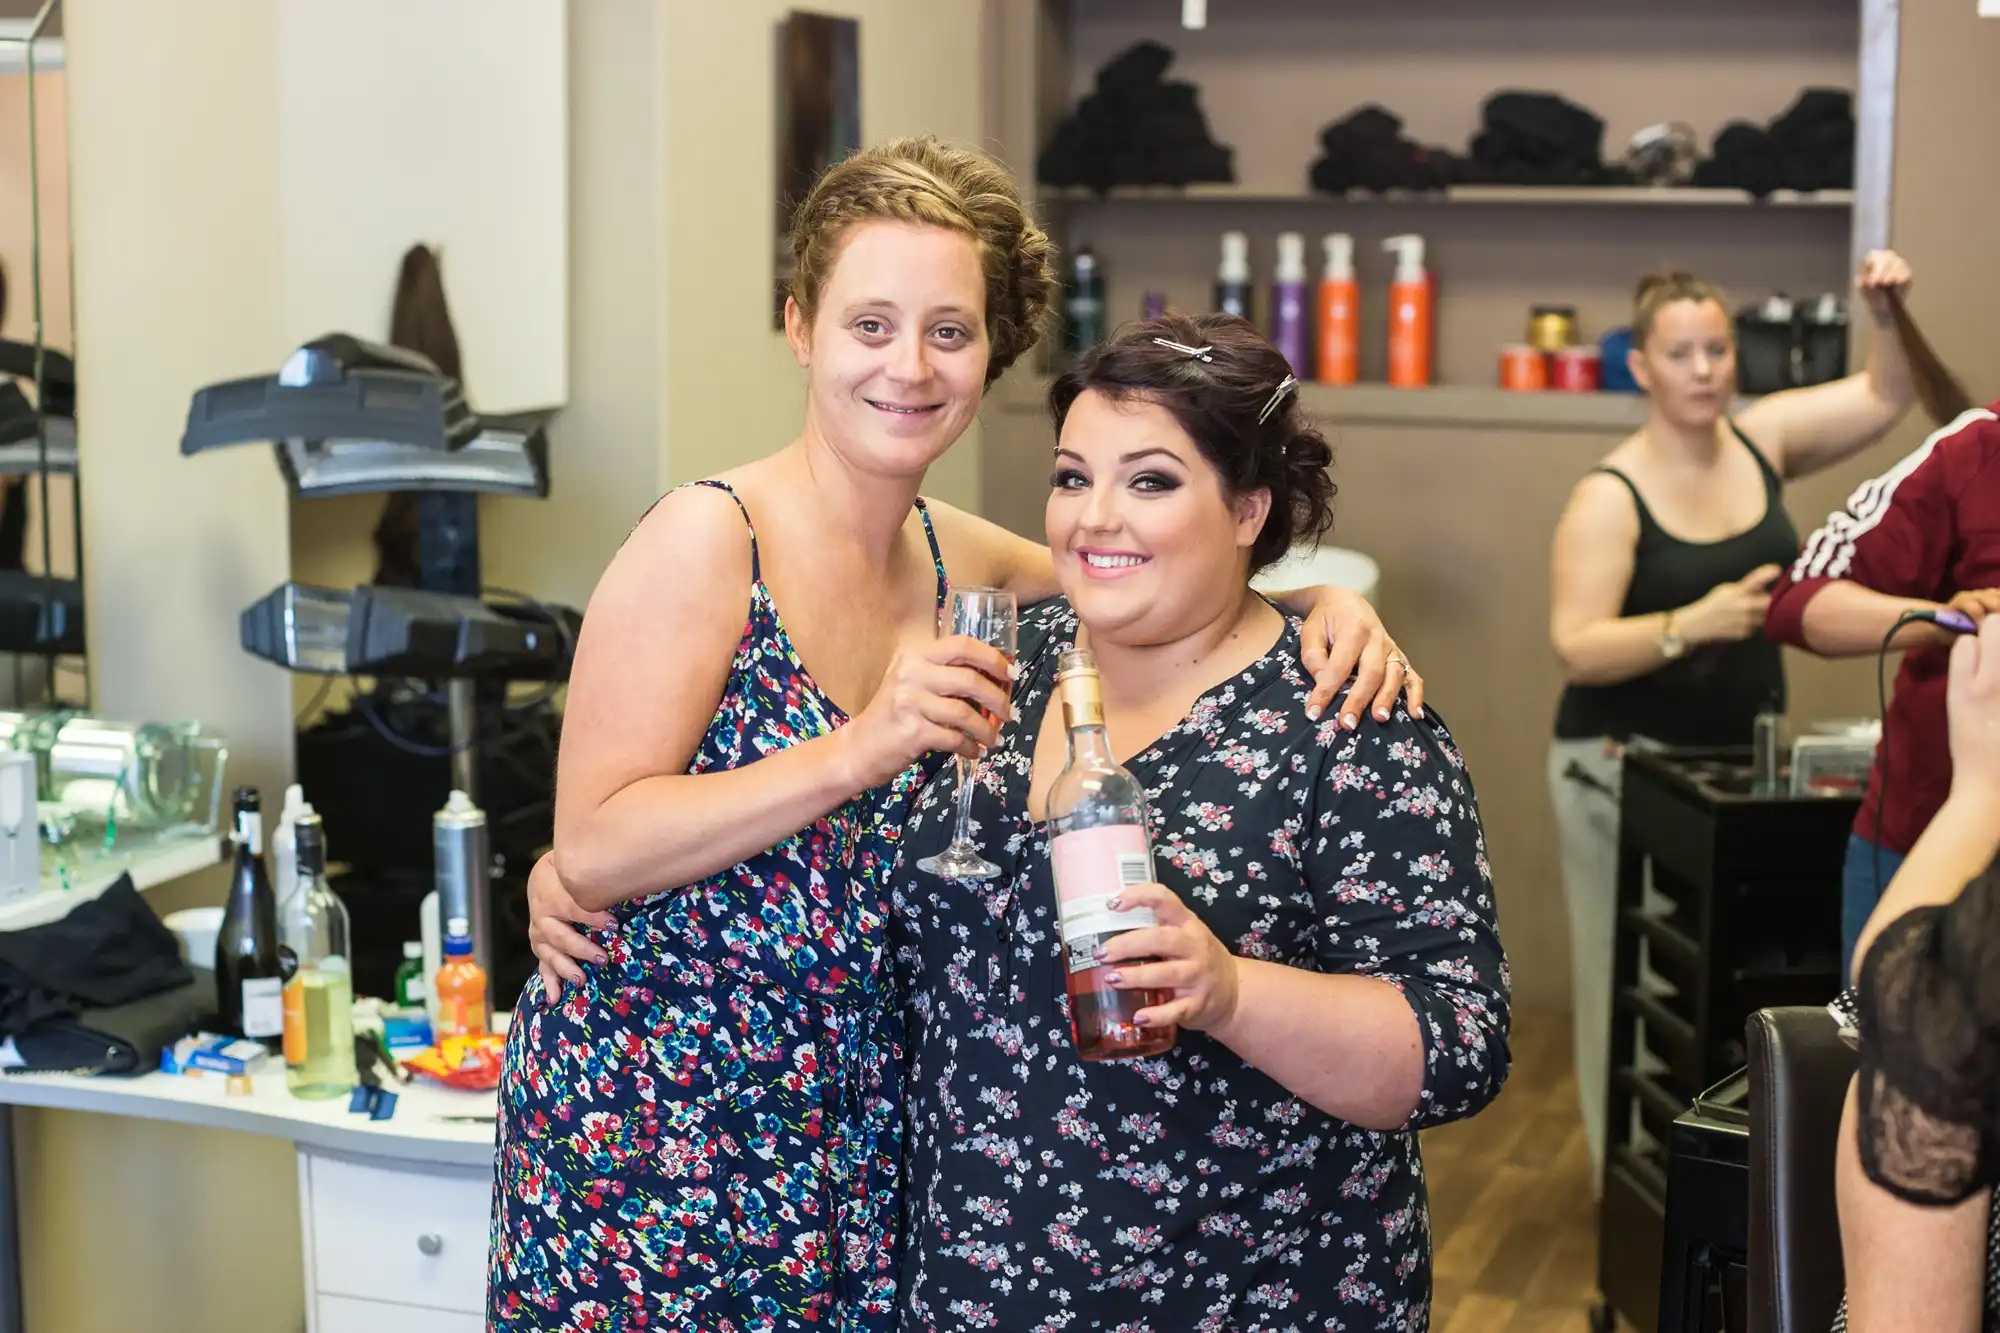 Two women smiling and holding champagne glasses in a busy salon, with other people and hairstyling equipment in the background.